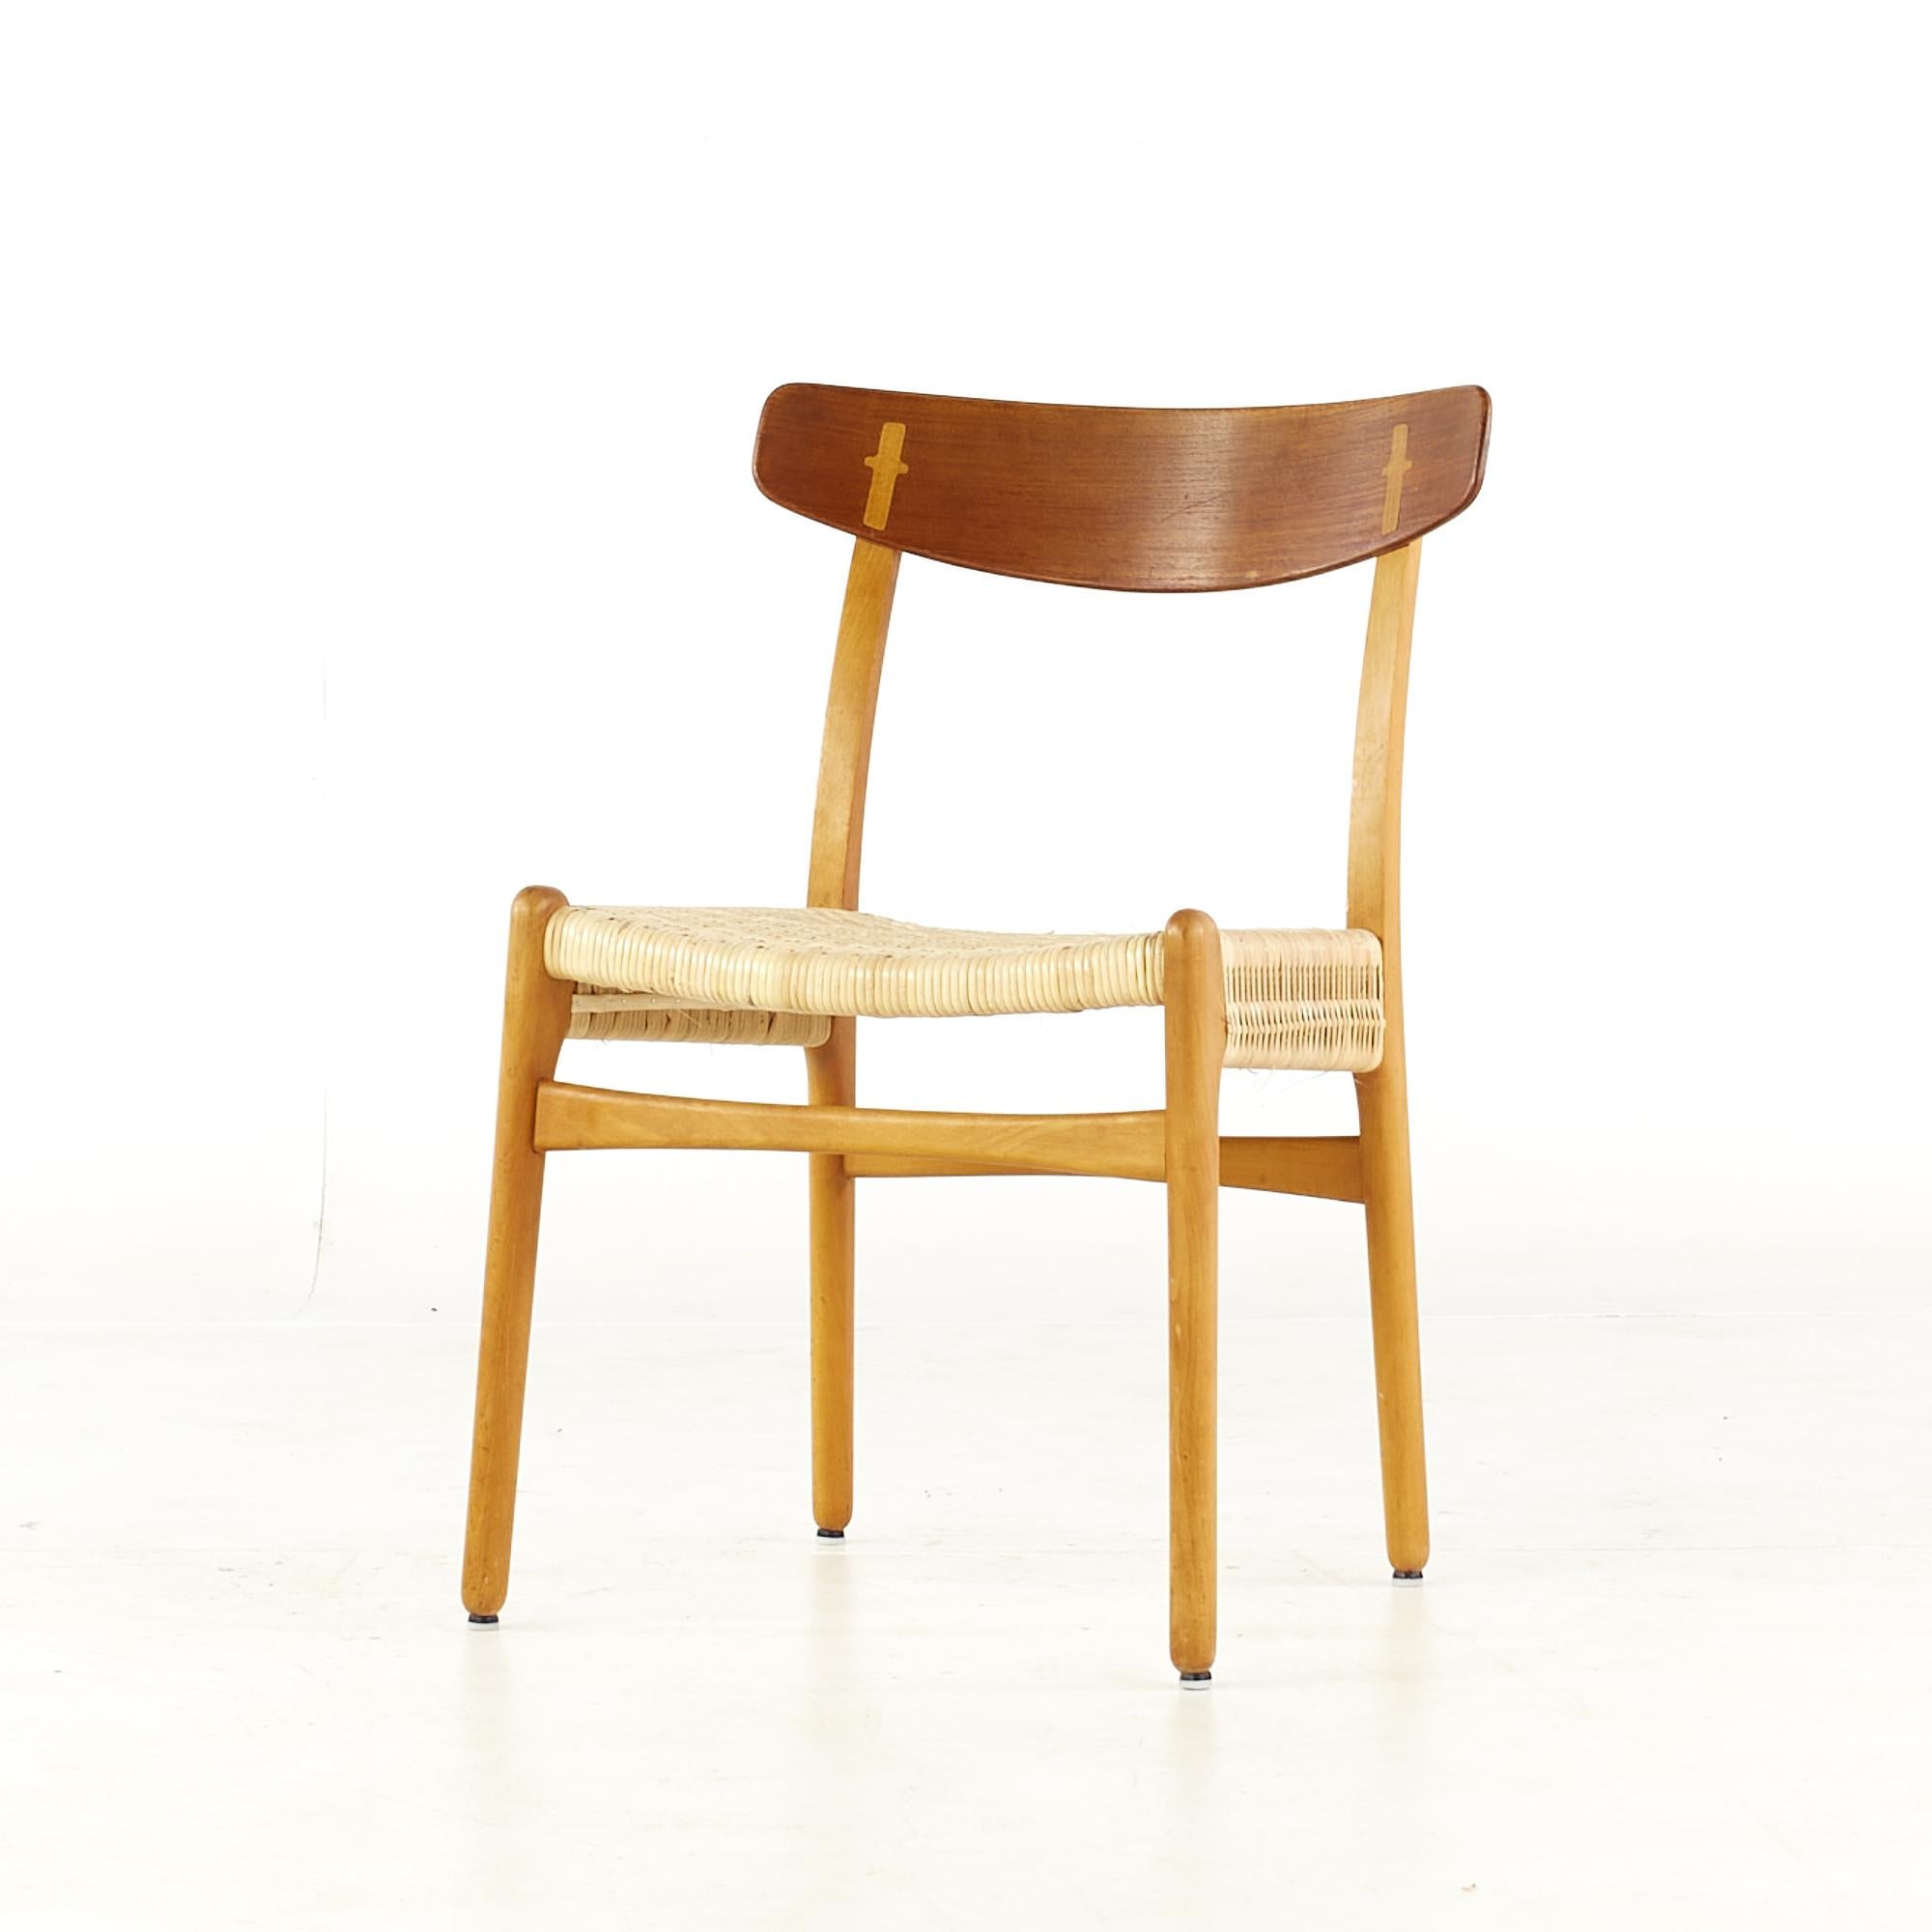 Late 20th Century Hans Wegner for Carl Hansen and Son Midcentury Teak CH23 Dining Chairs, Pair For Sale